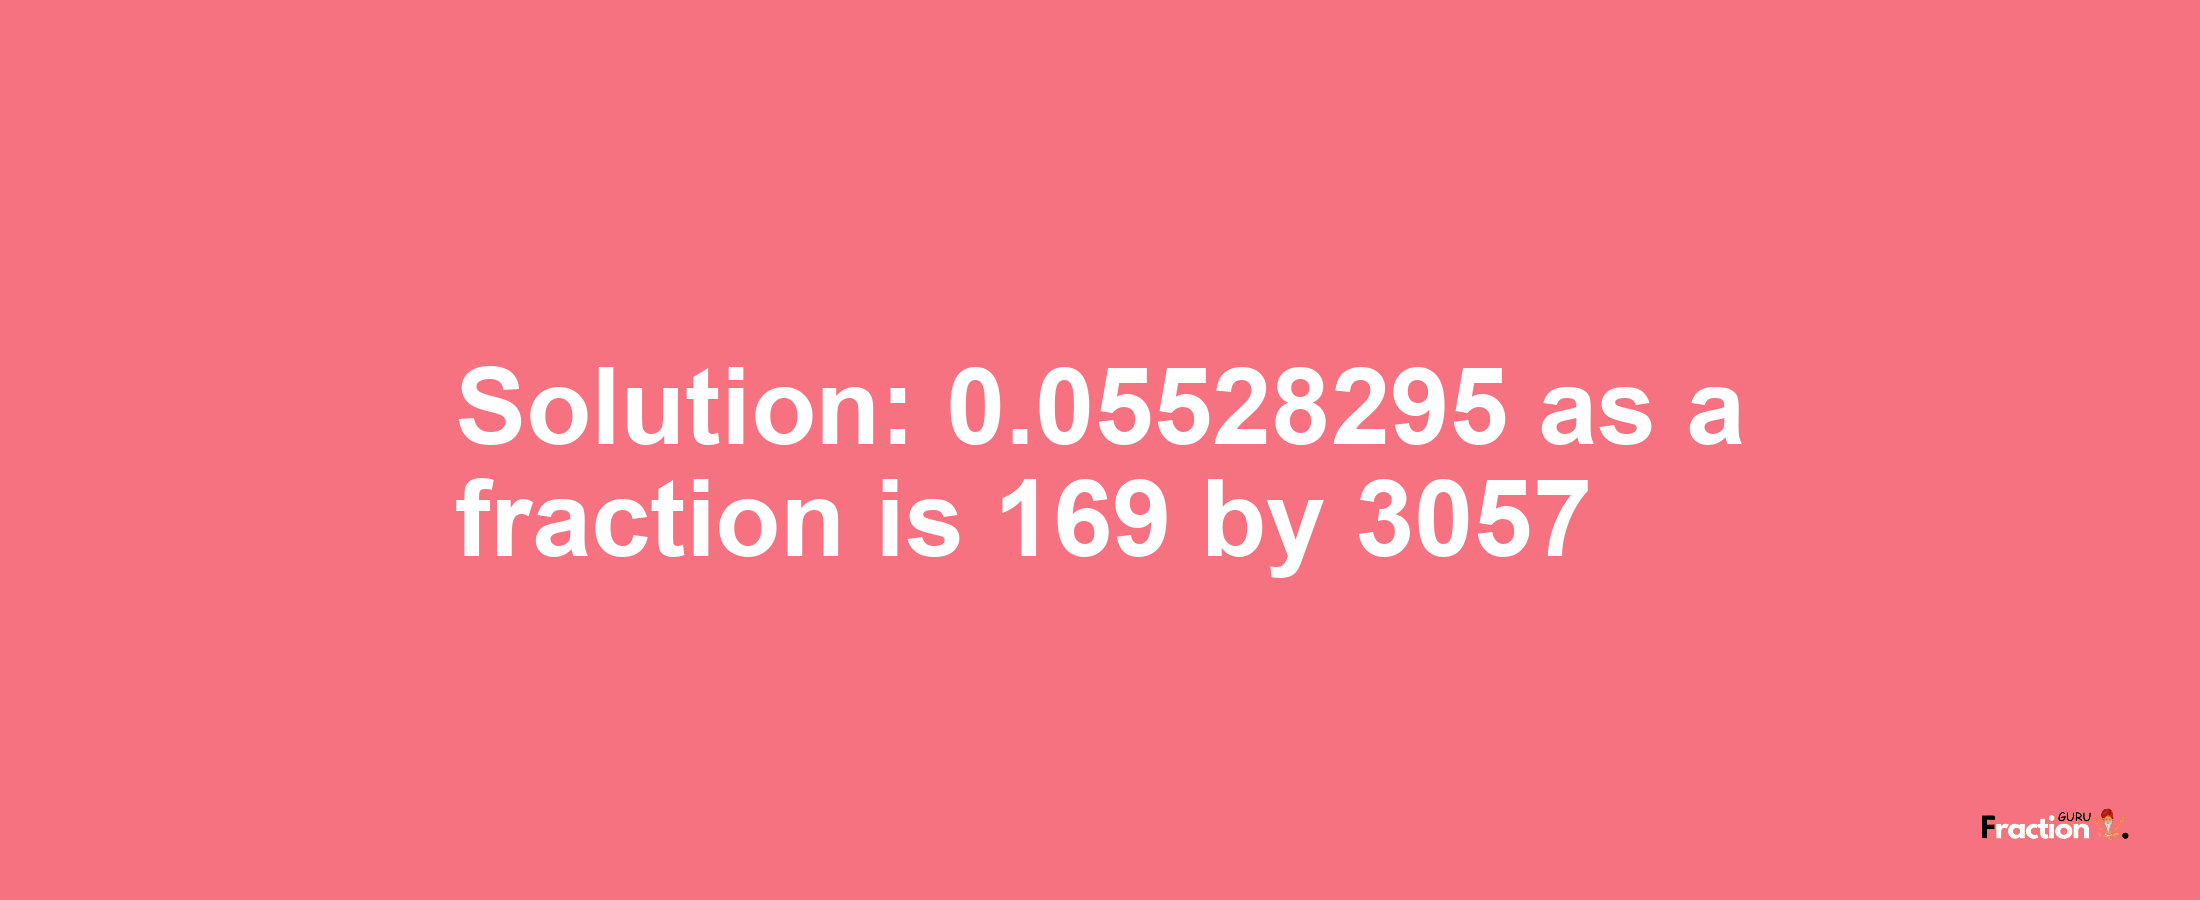 Solution:0.05528295 as a fraction is 169/3057